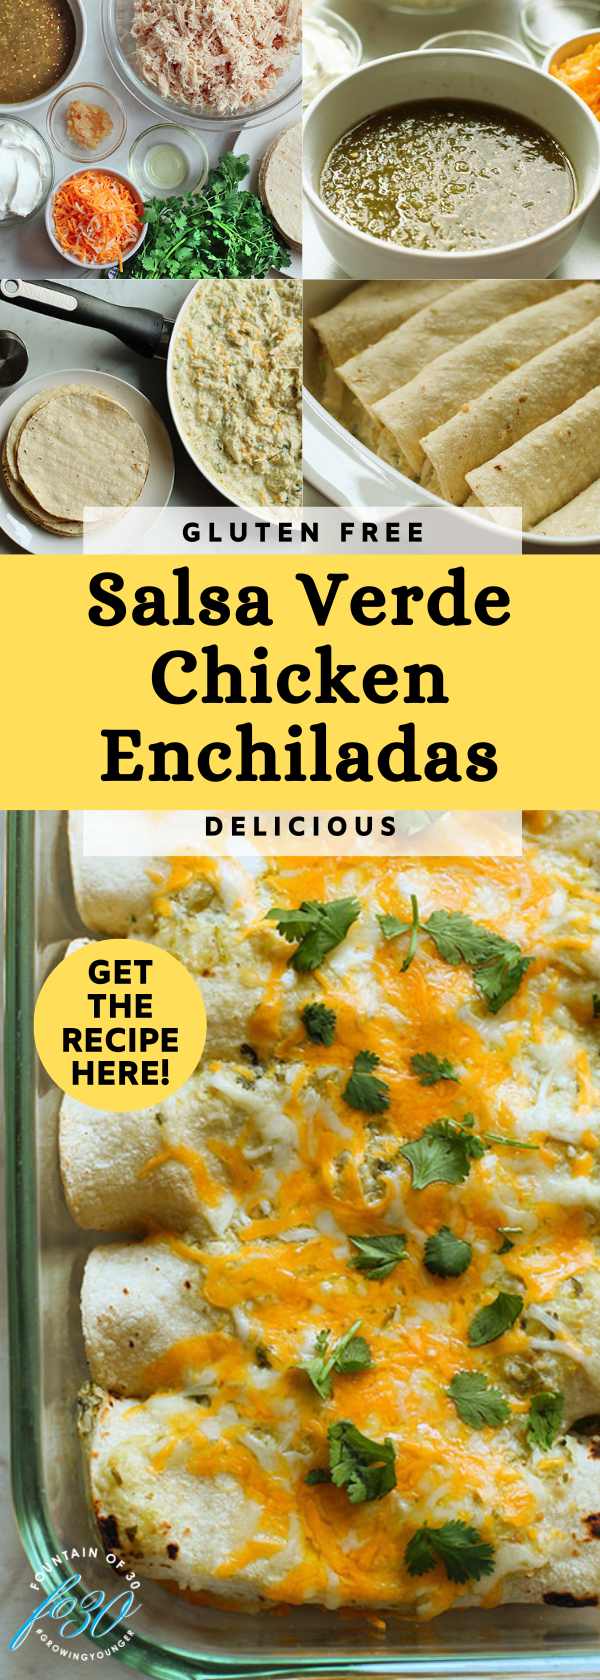 These delicious Salsa Verde Chicken Enchiladas are easy to make! This tangy green salsa Mexican dish is also gluten-free!